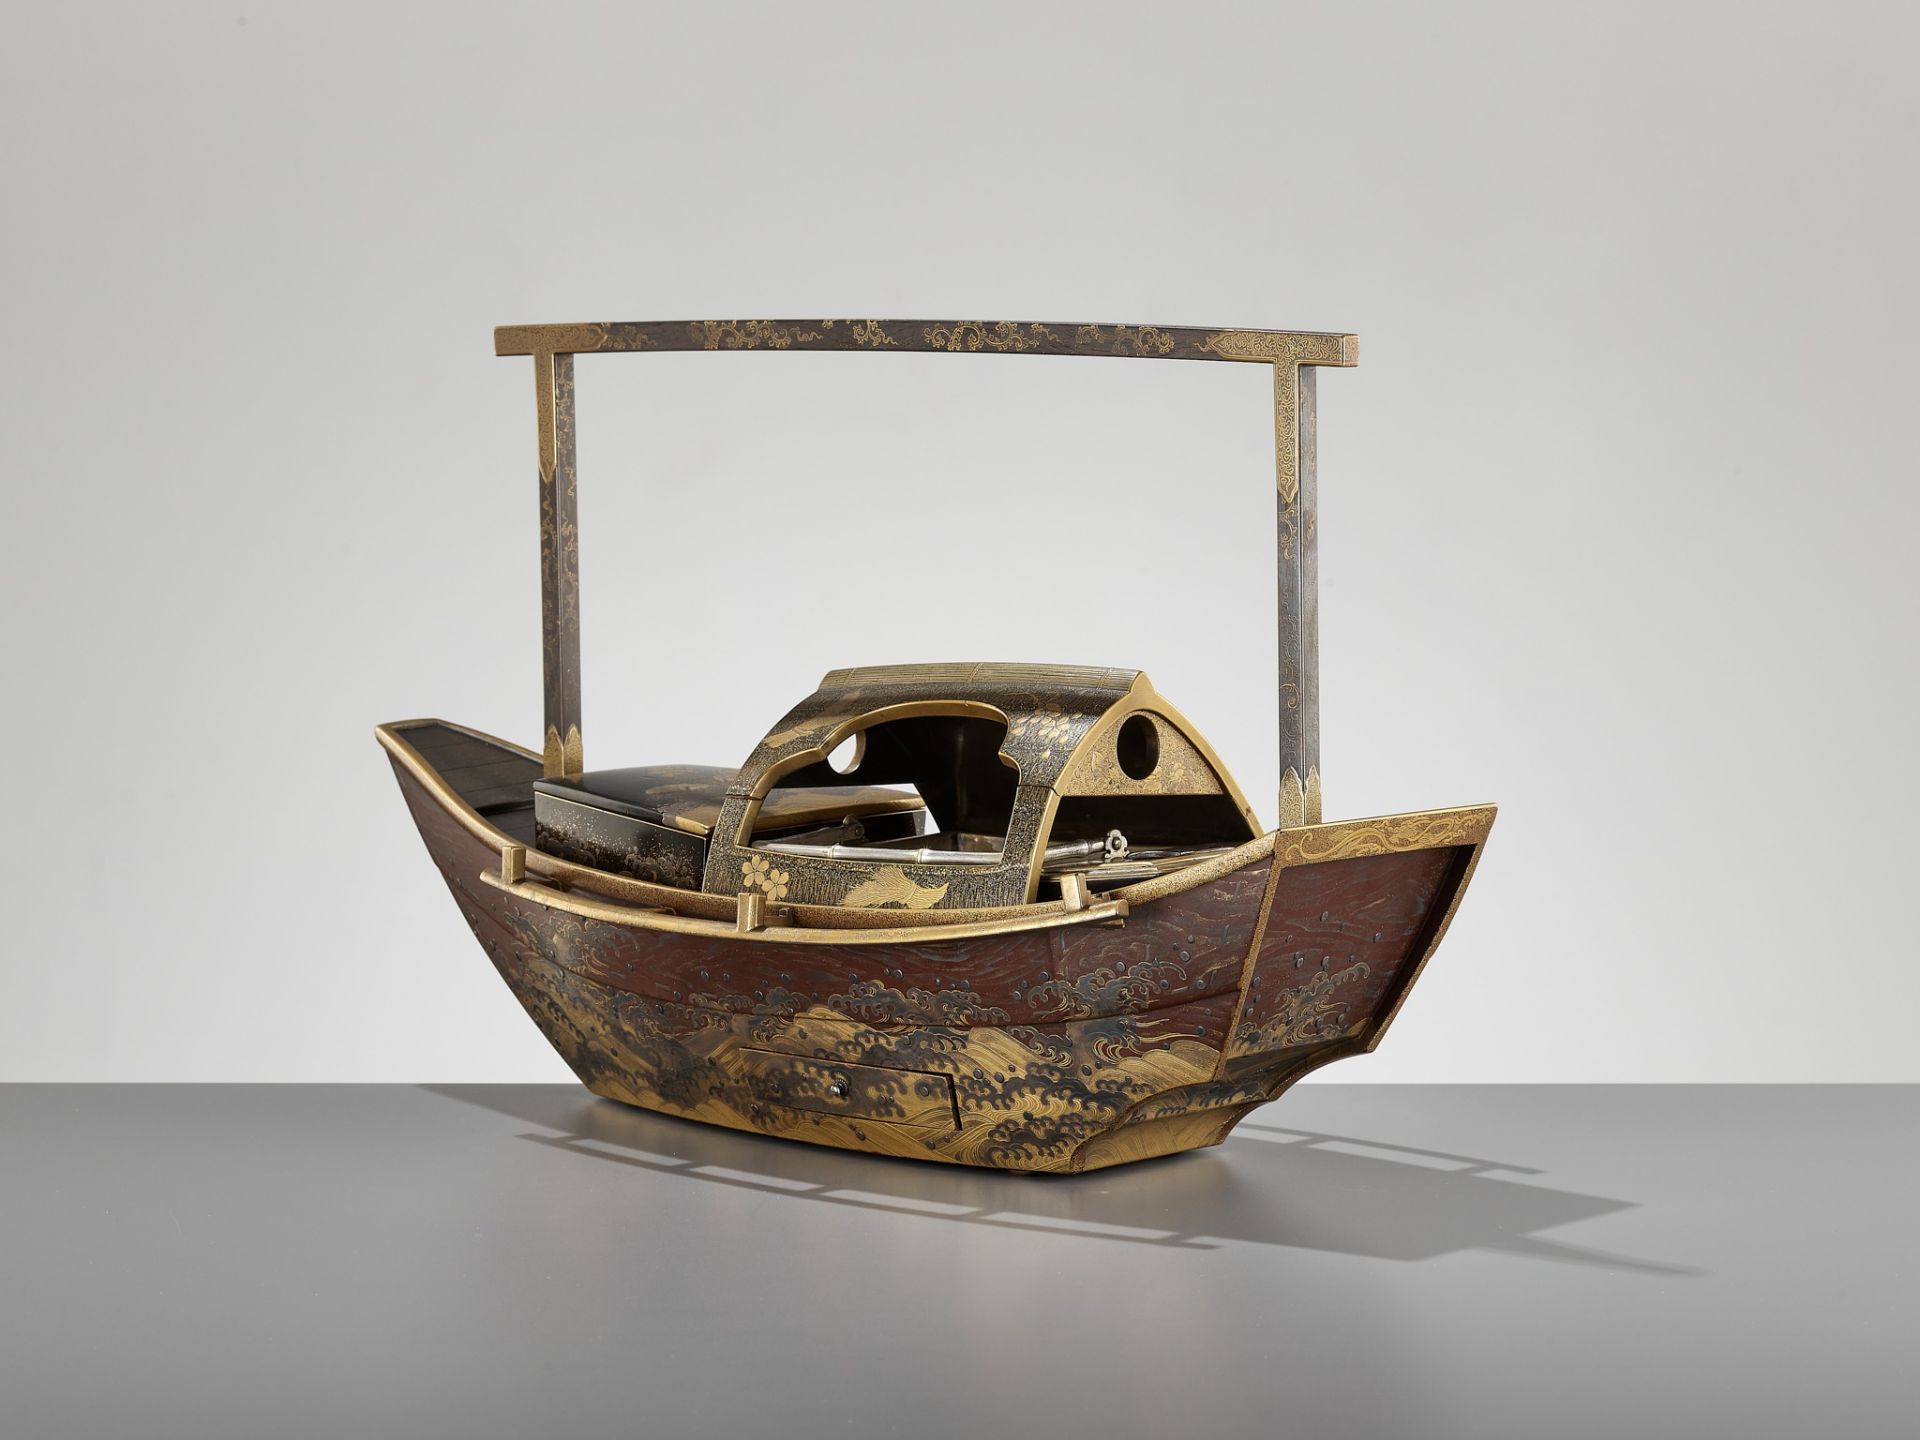 A RARE LACQUER SMOKING SET (TABAKO BON) IN THE FORM OF A BOAT - Image 9 of 18